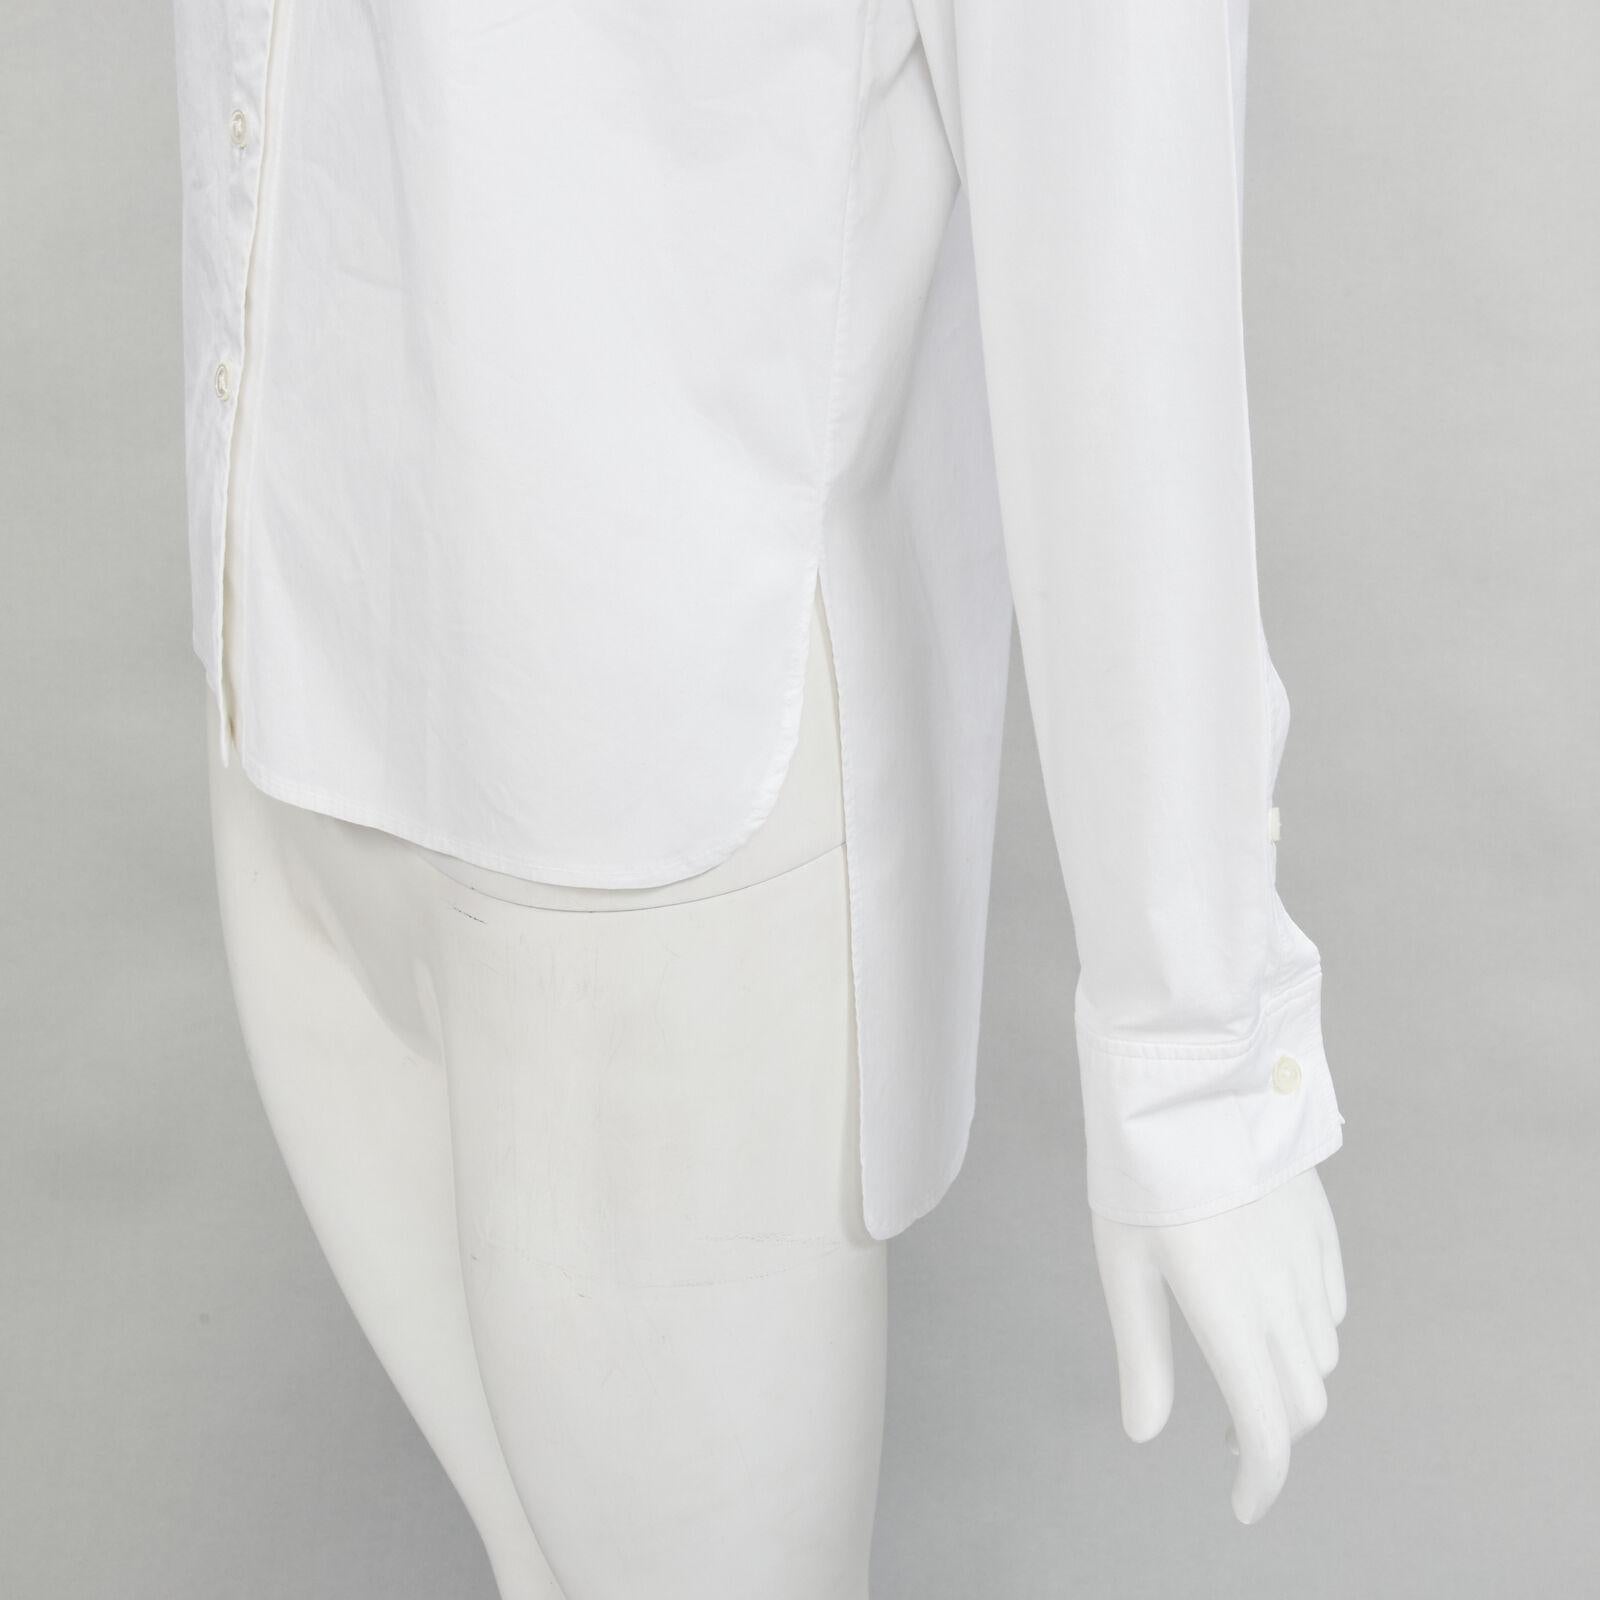 JEAN PAUL GAULTIER white cotton high low hem button up shirt IT38 XS
Reference: JACG/A00079
Brand: Jean Paul Gaultier
Designer: Jean Paul Gaultier
Material: Cotton
Color: White
Pattern: Solid
Closure: Button
Extra Details: Slit at collar for collar